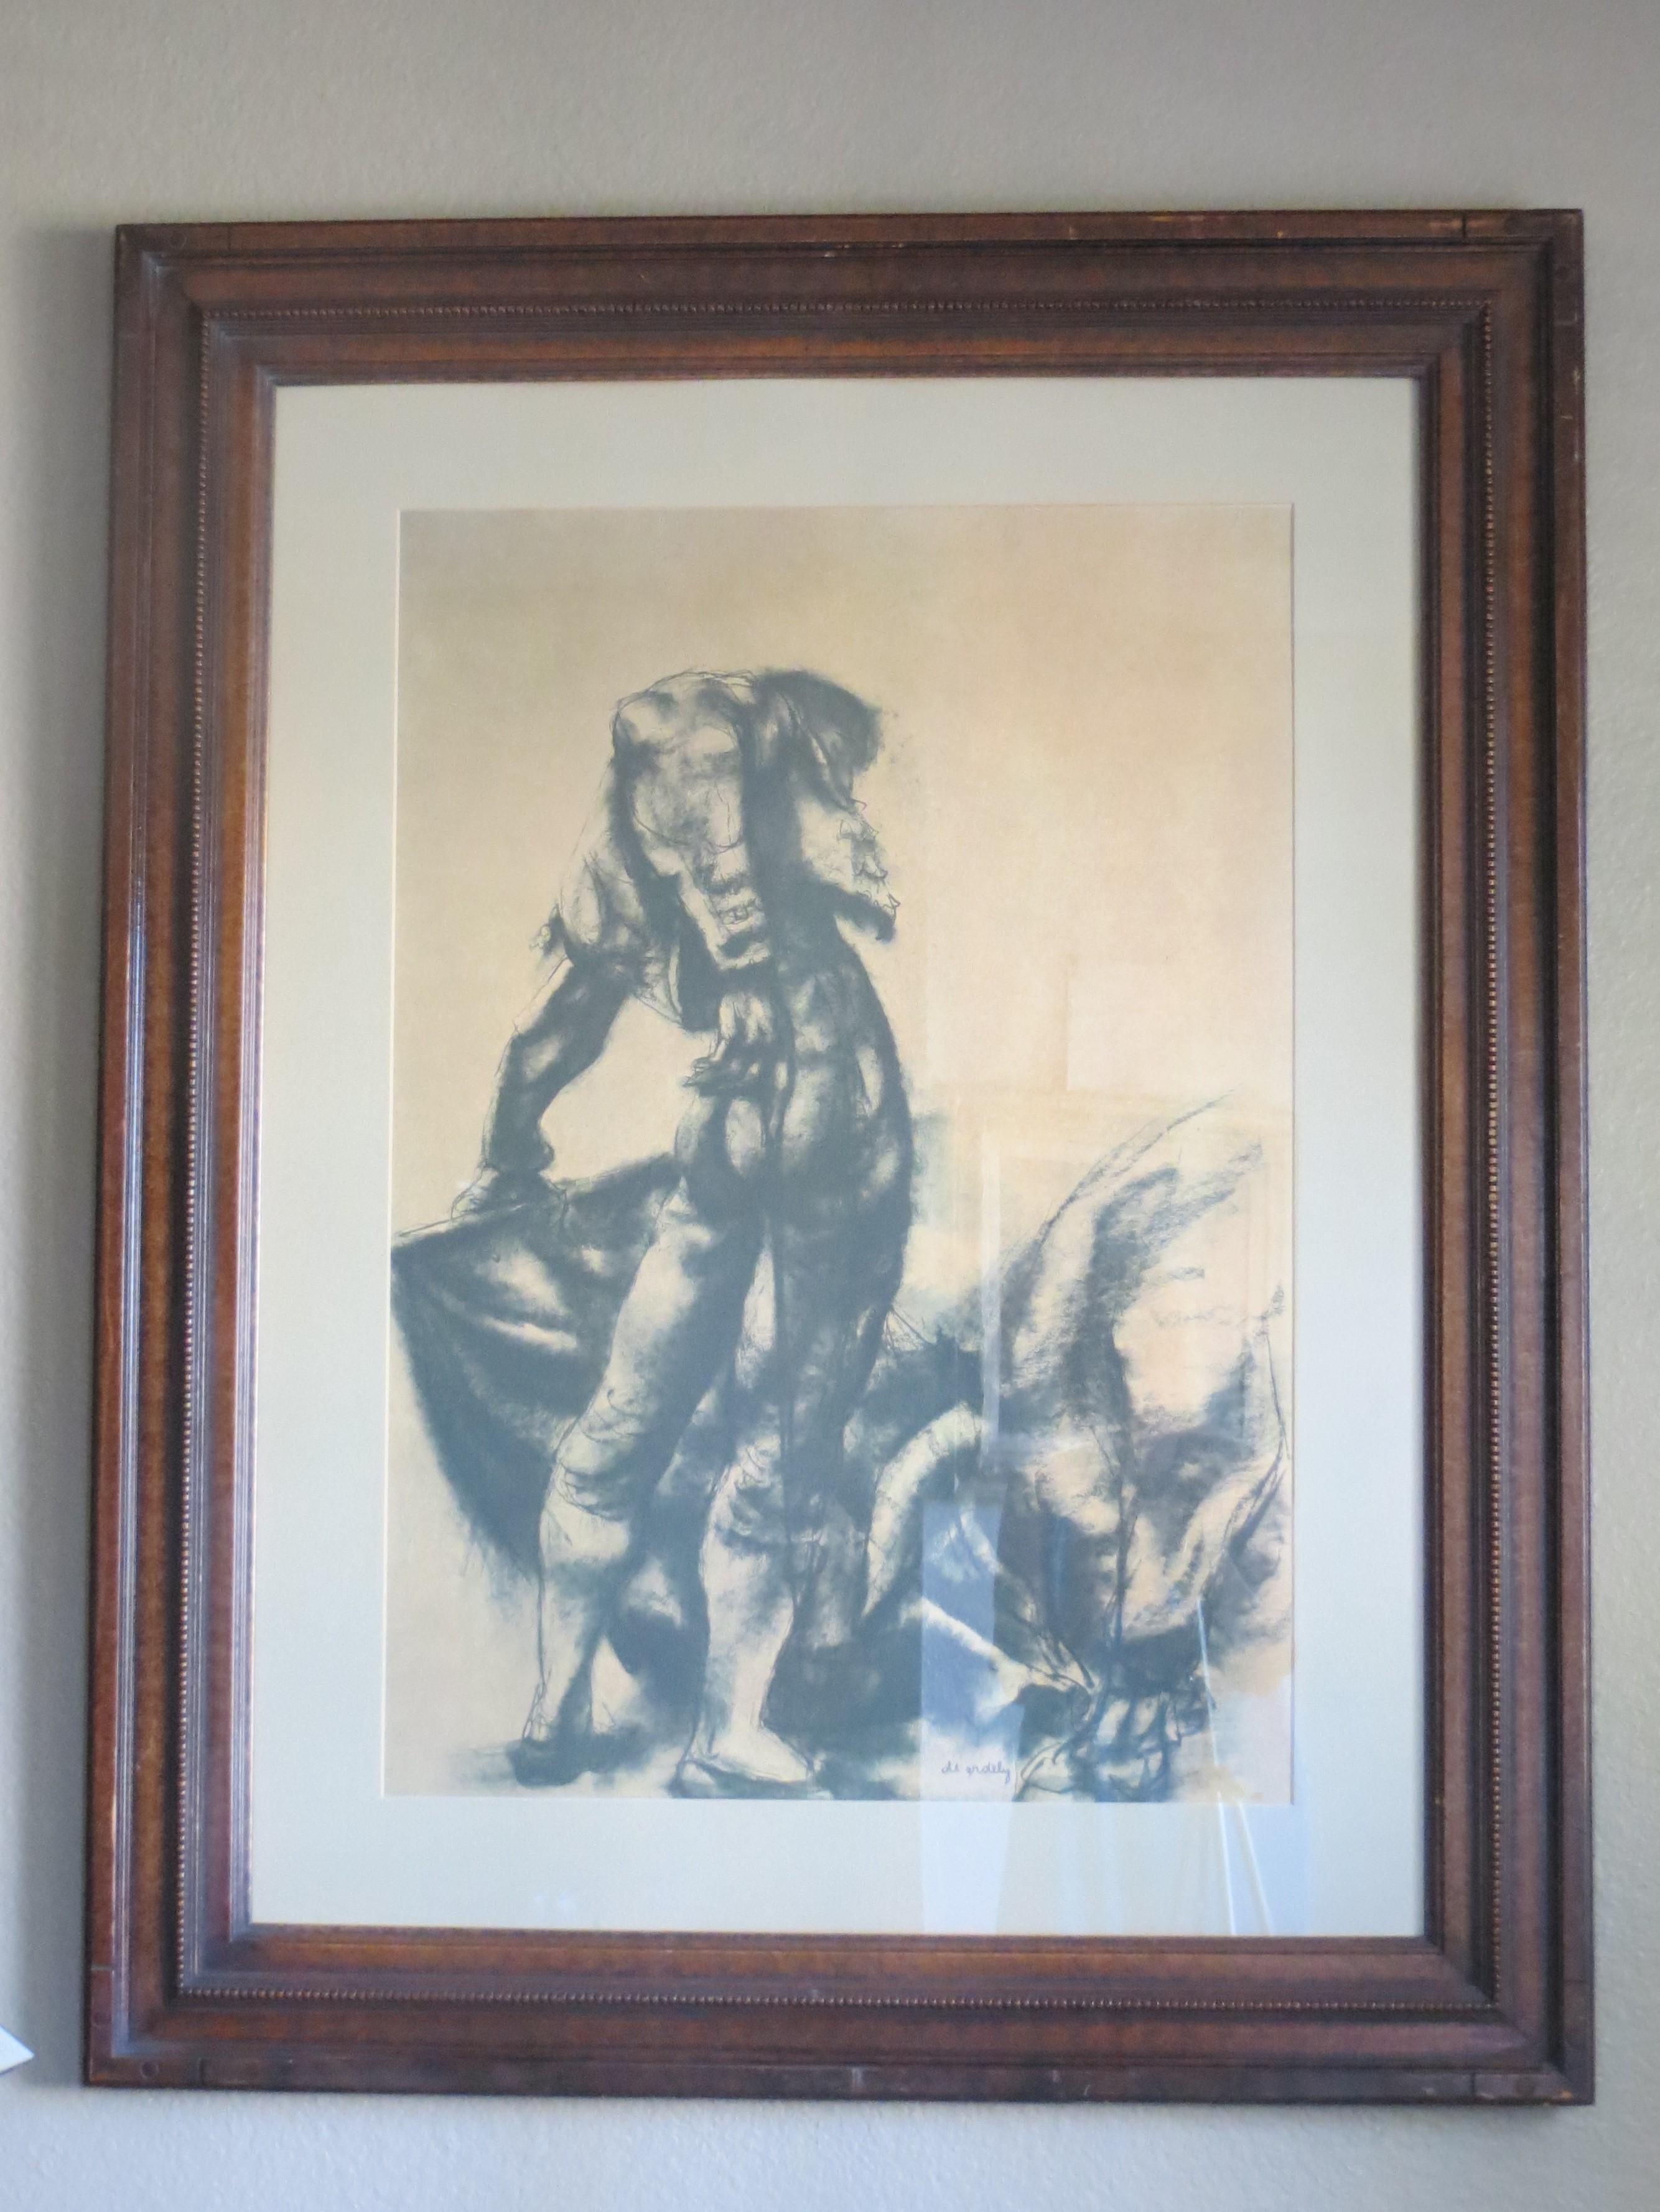 Mixed Media, signed bullfighting scene.Very well framed.  Francis De Erdely was recognized for his artistic influence on many emerging Californiaartists during the 1940's, and was known for colorfully capturing  ...Francis de Erdely (birth name: